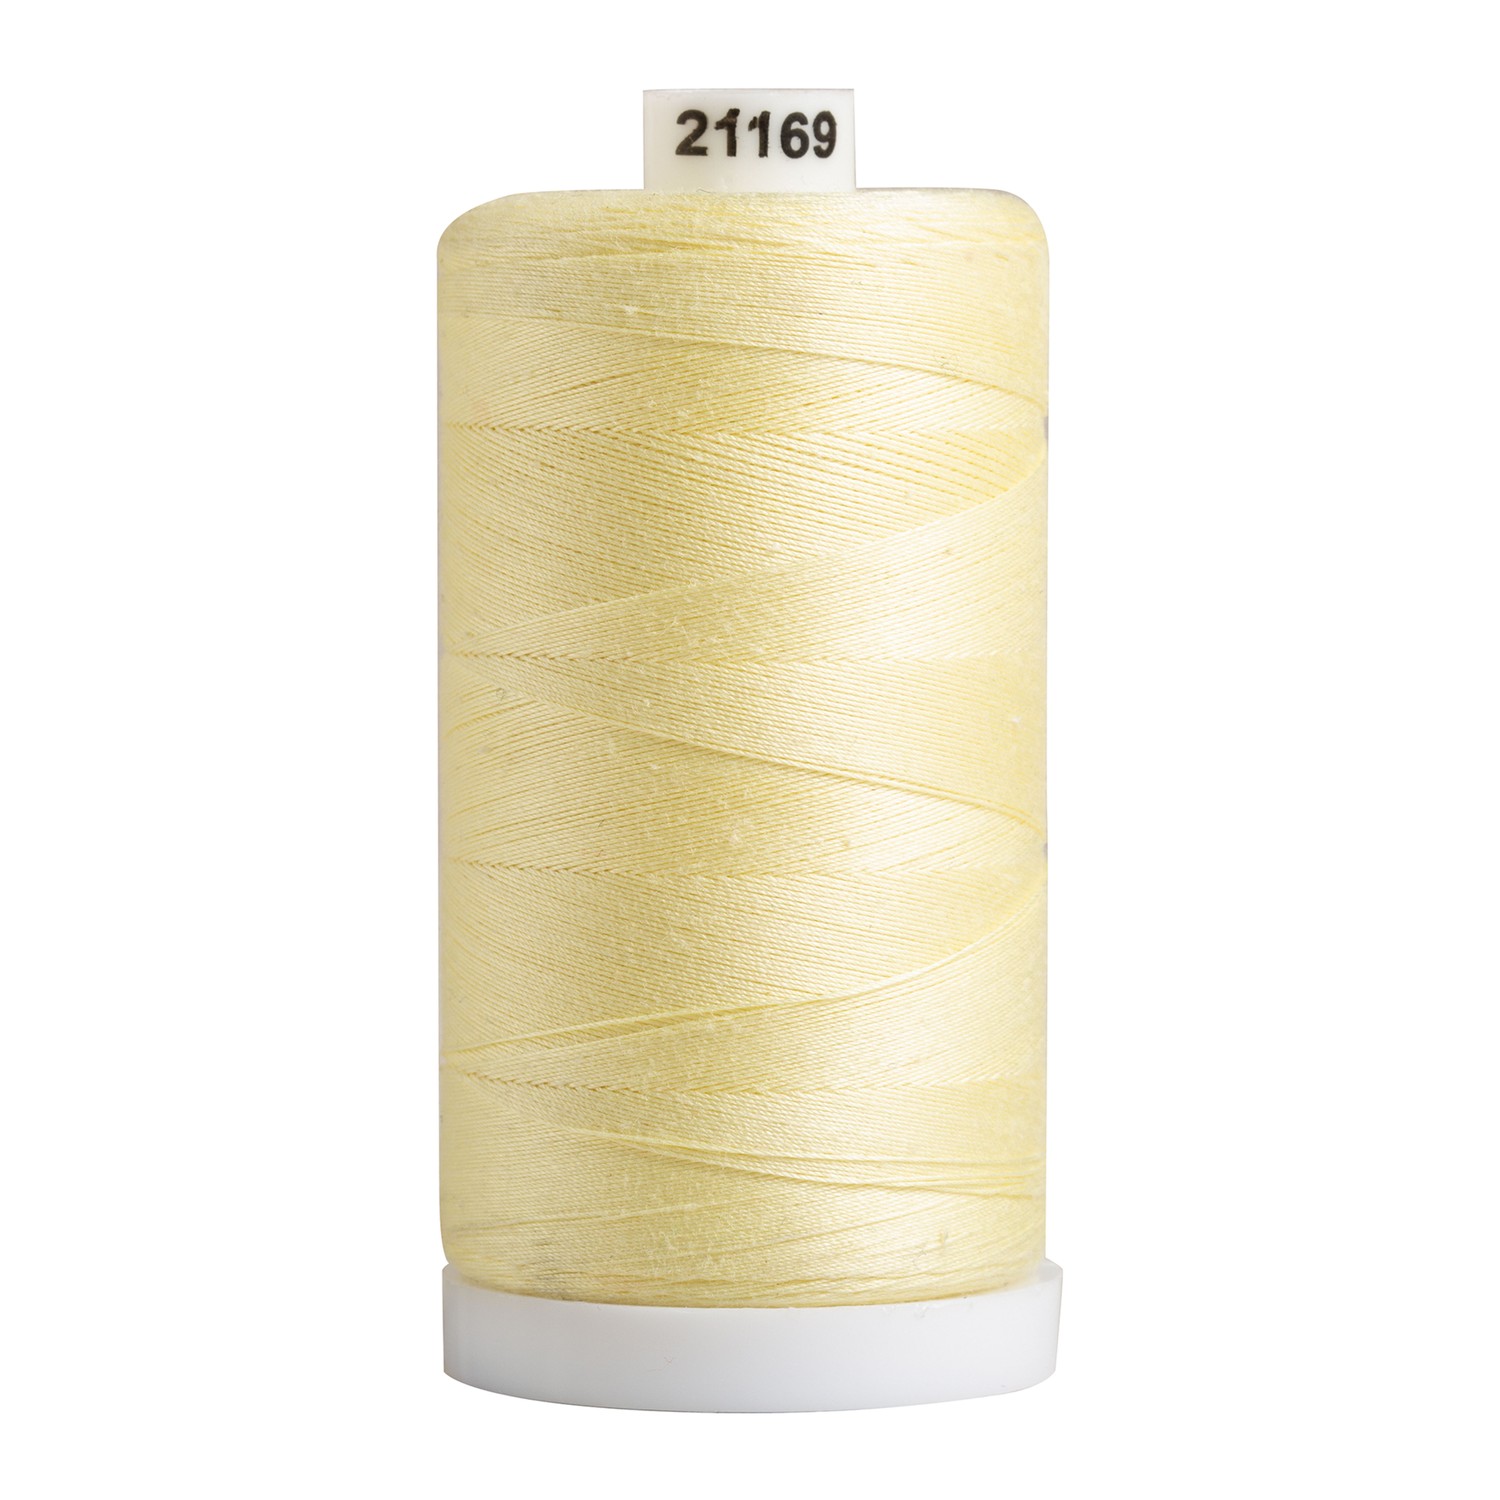 Connecting Threads 100% Cotton Thread - 1200 Yard Spool (Red)